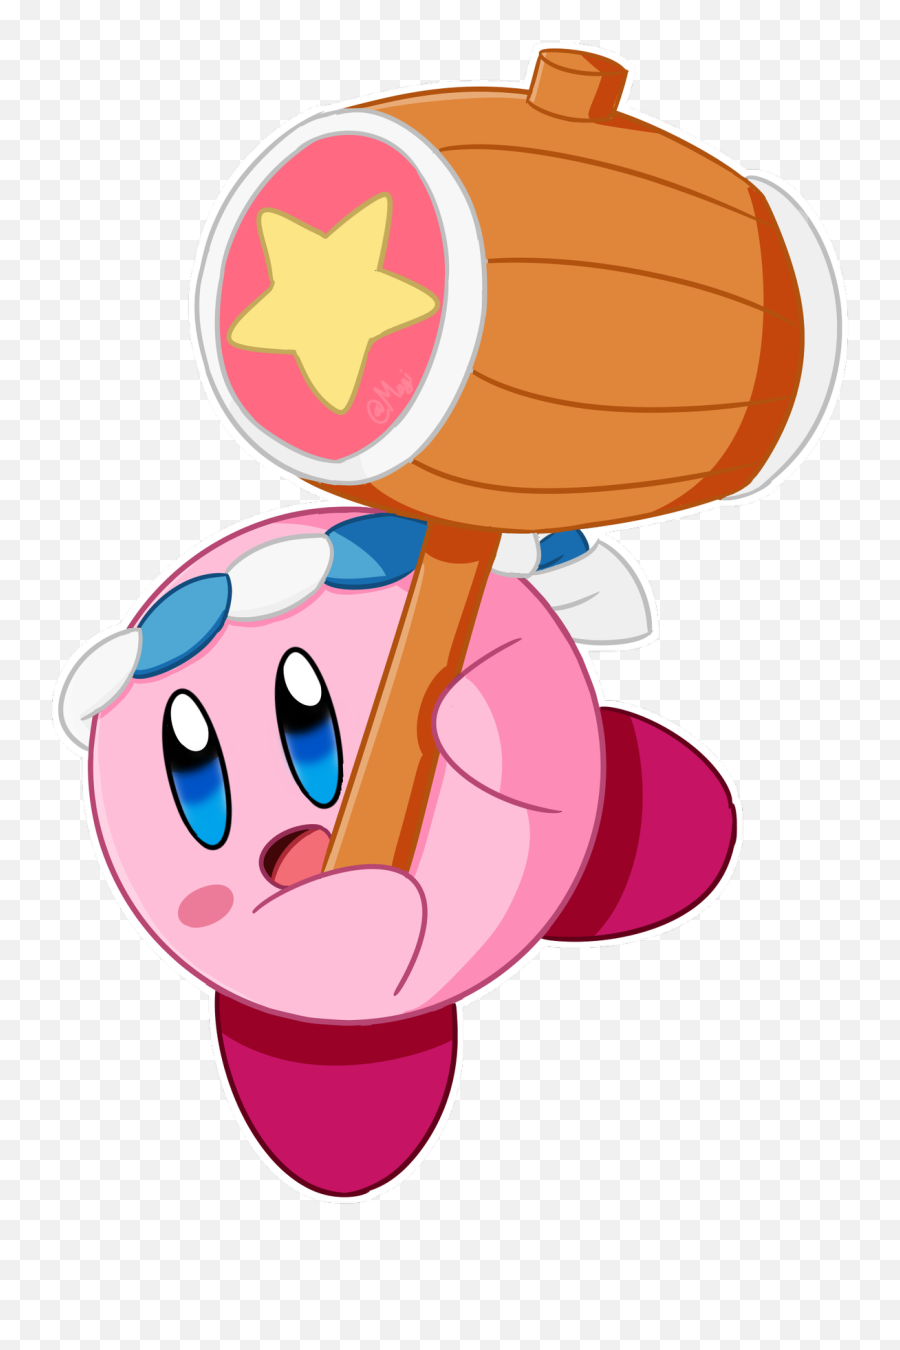 Kirby - Kirby With Hammer Png,Kirby Png